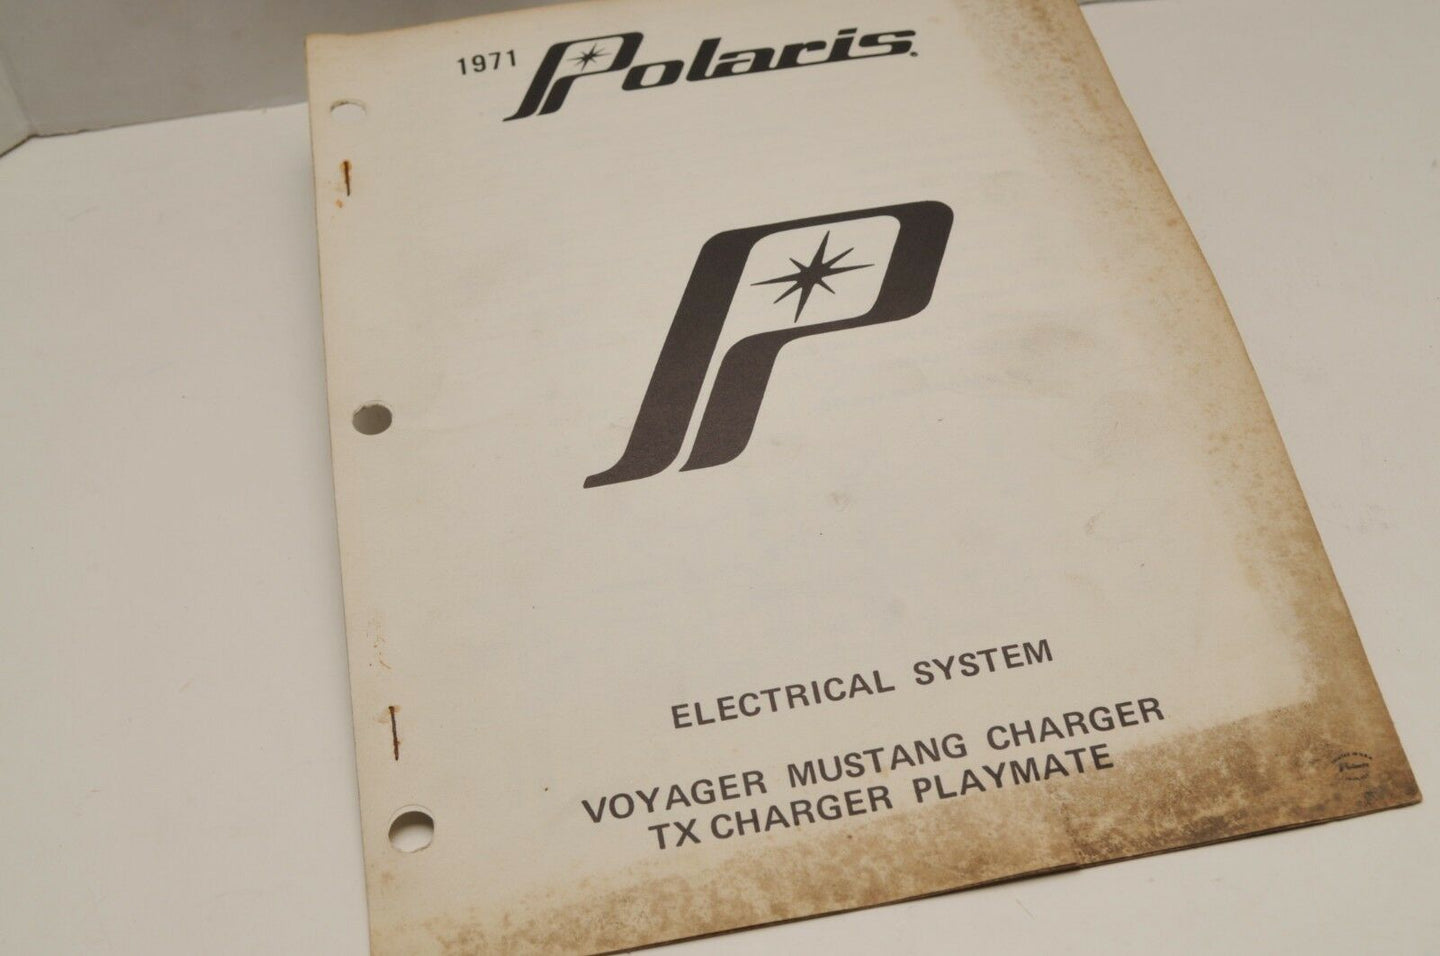 Vintage Polaris Parts Manual 1971 Mustang Charger Electrical Snowmobile Genuine